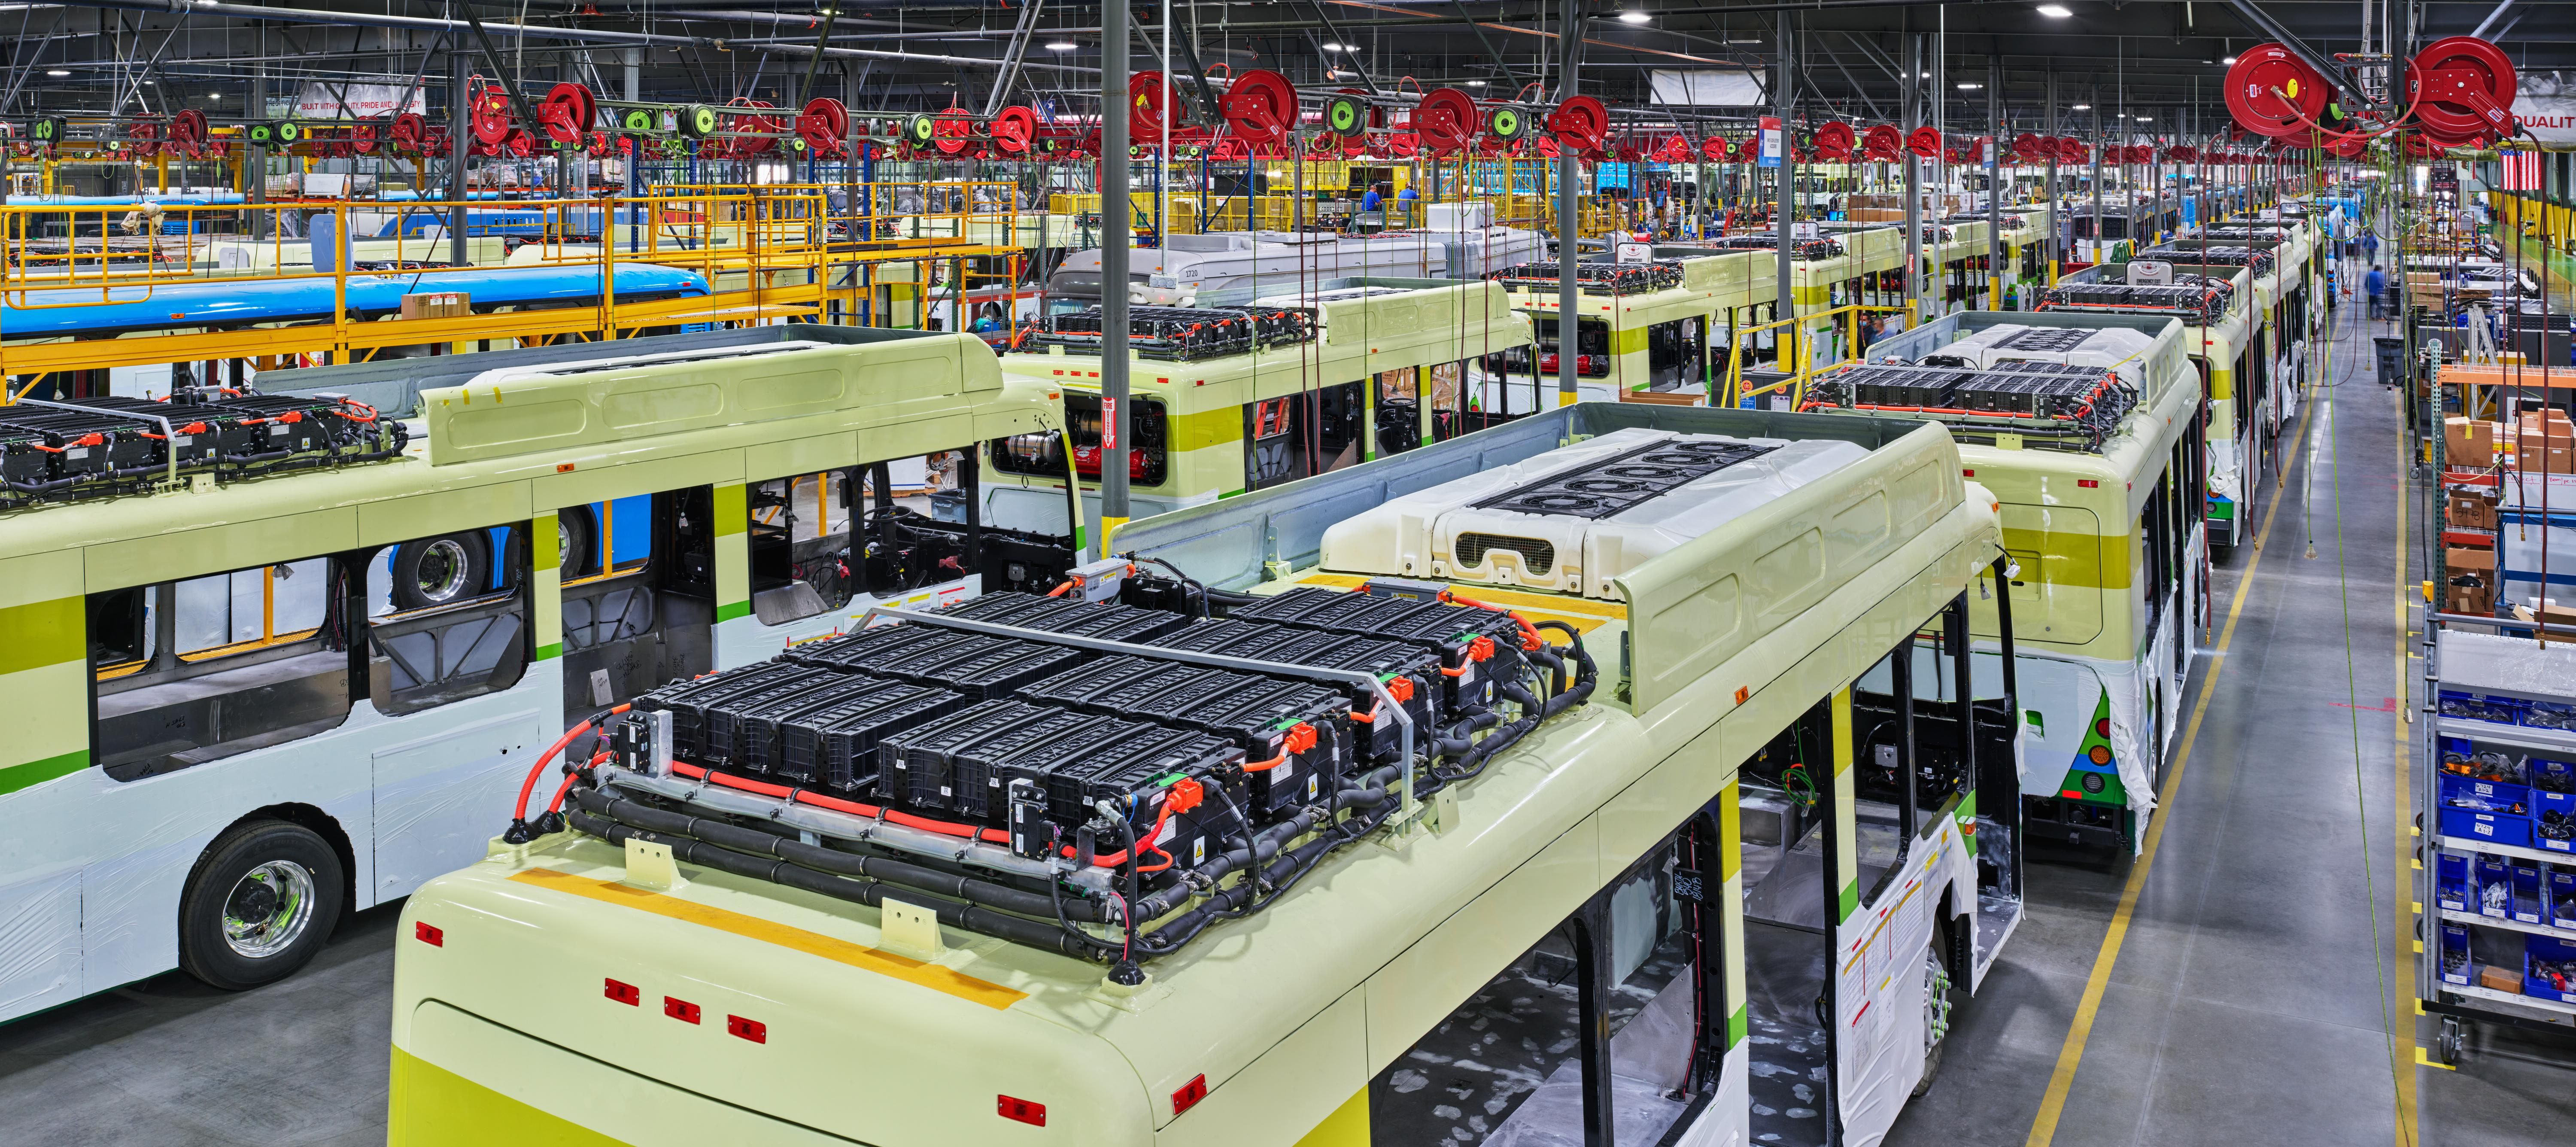 Dozens of yellow mass transit buses are shown getting the finishing touches on the factory floor.